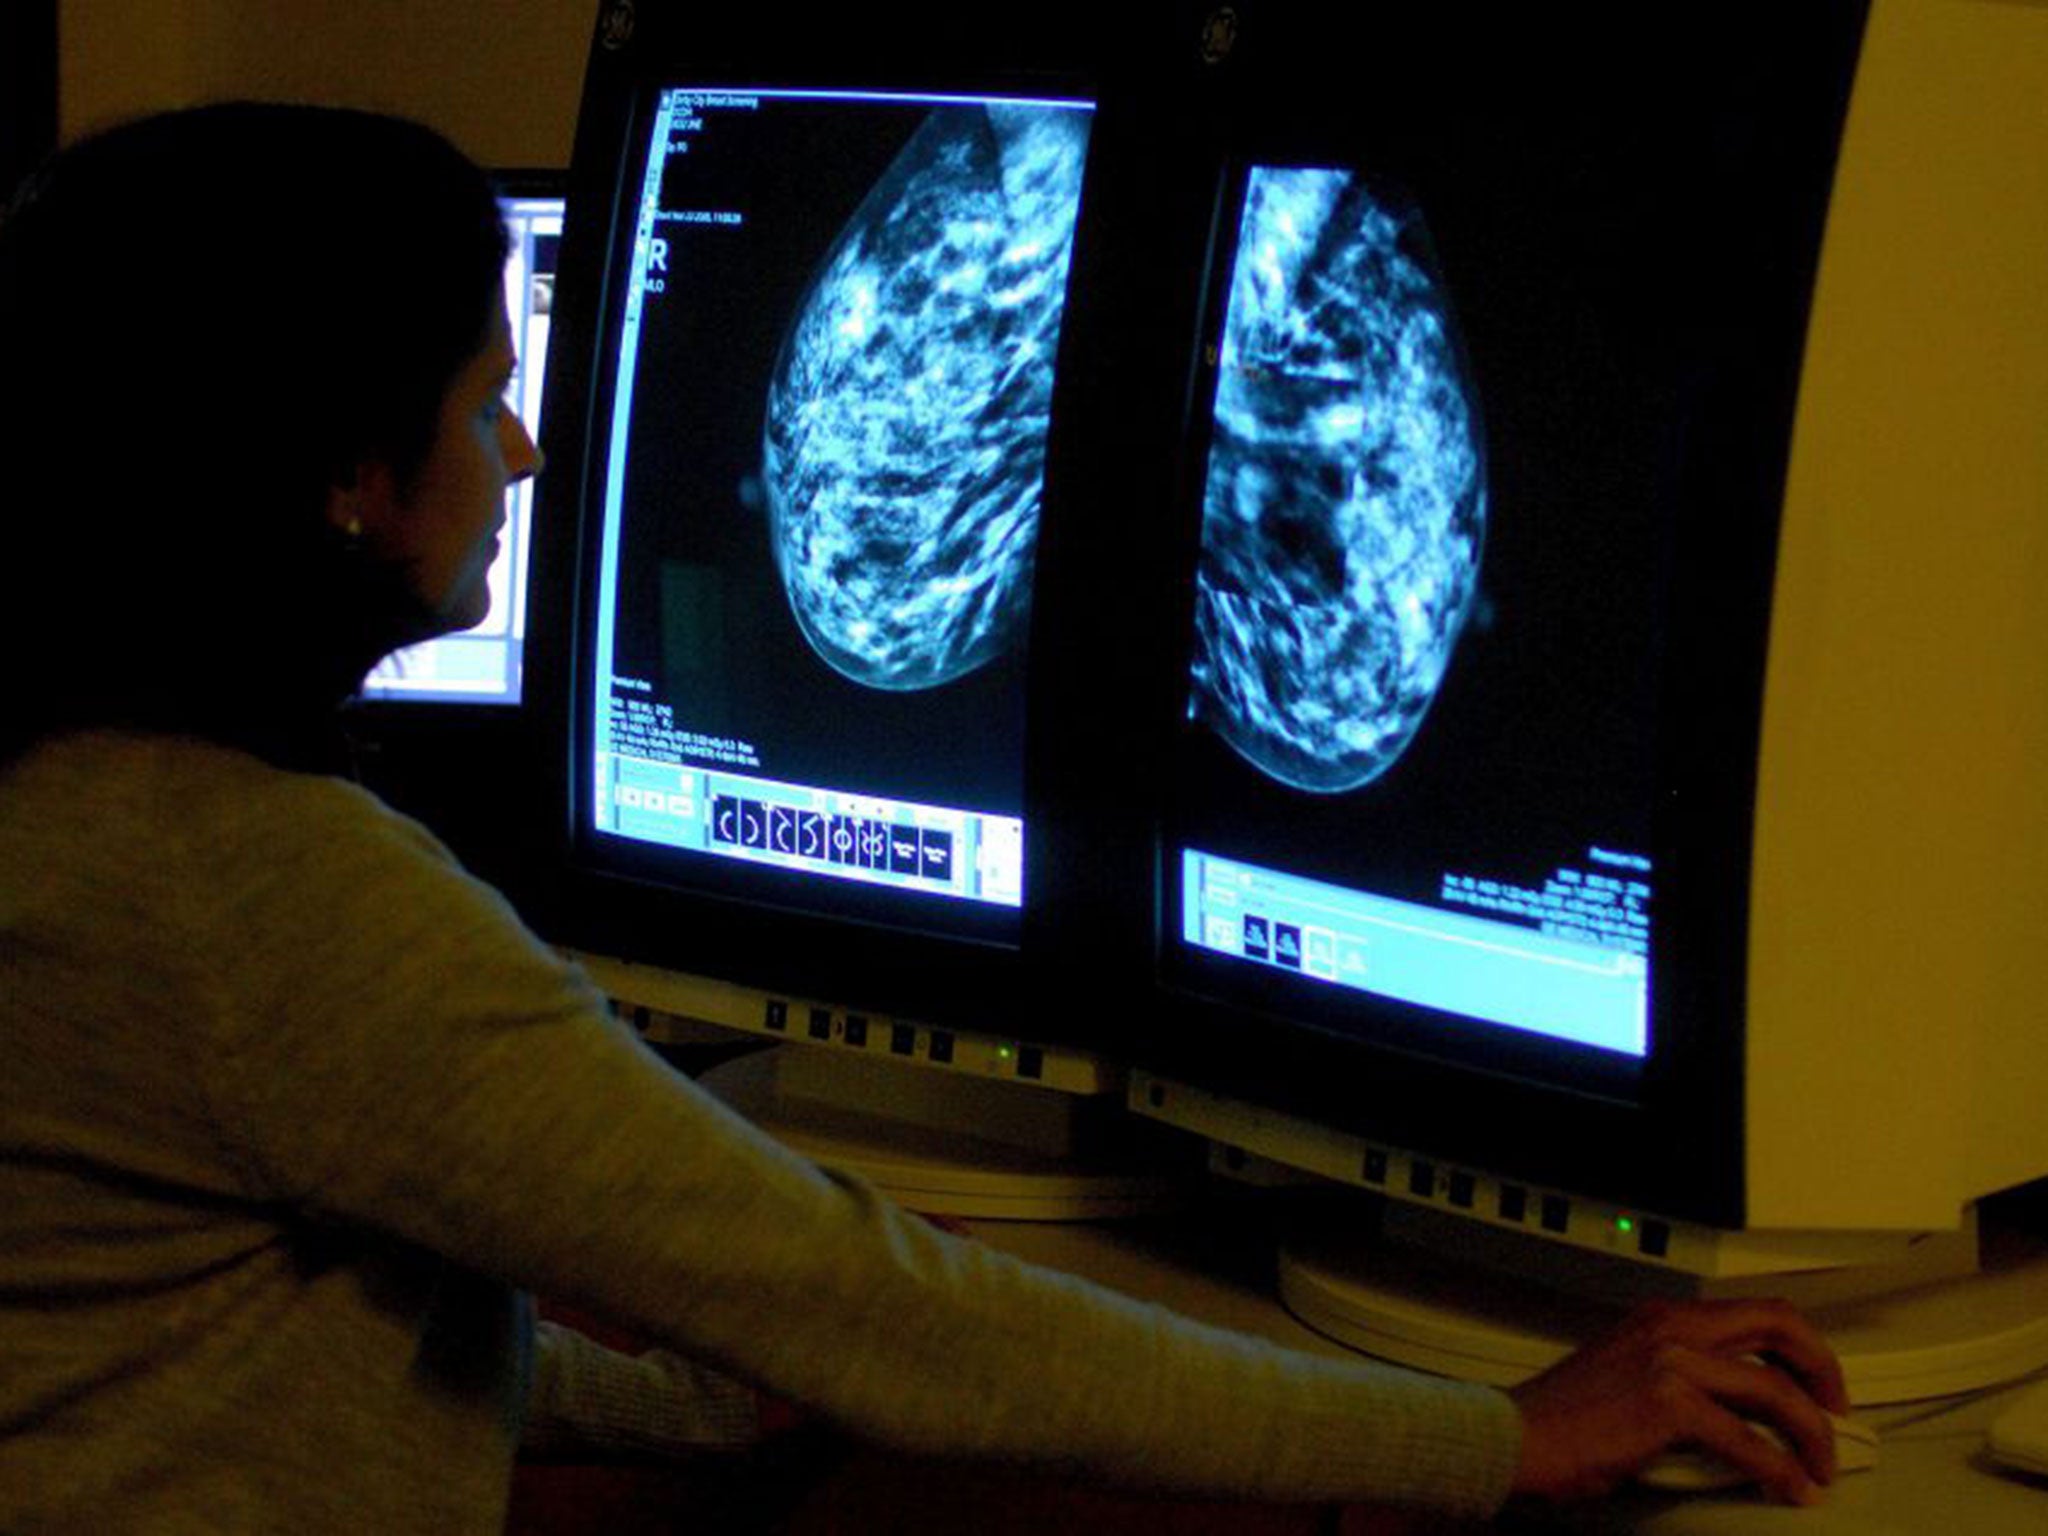 A consultant analysing a mammogram showing a woman's breast in order check for breast cancer